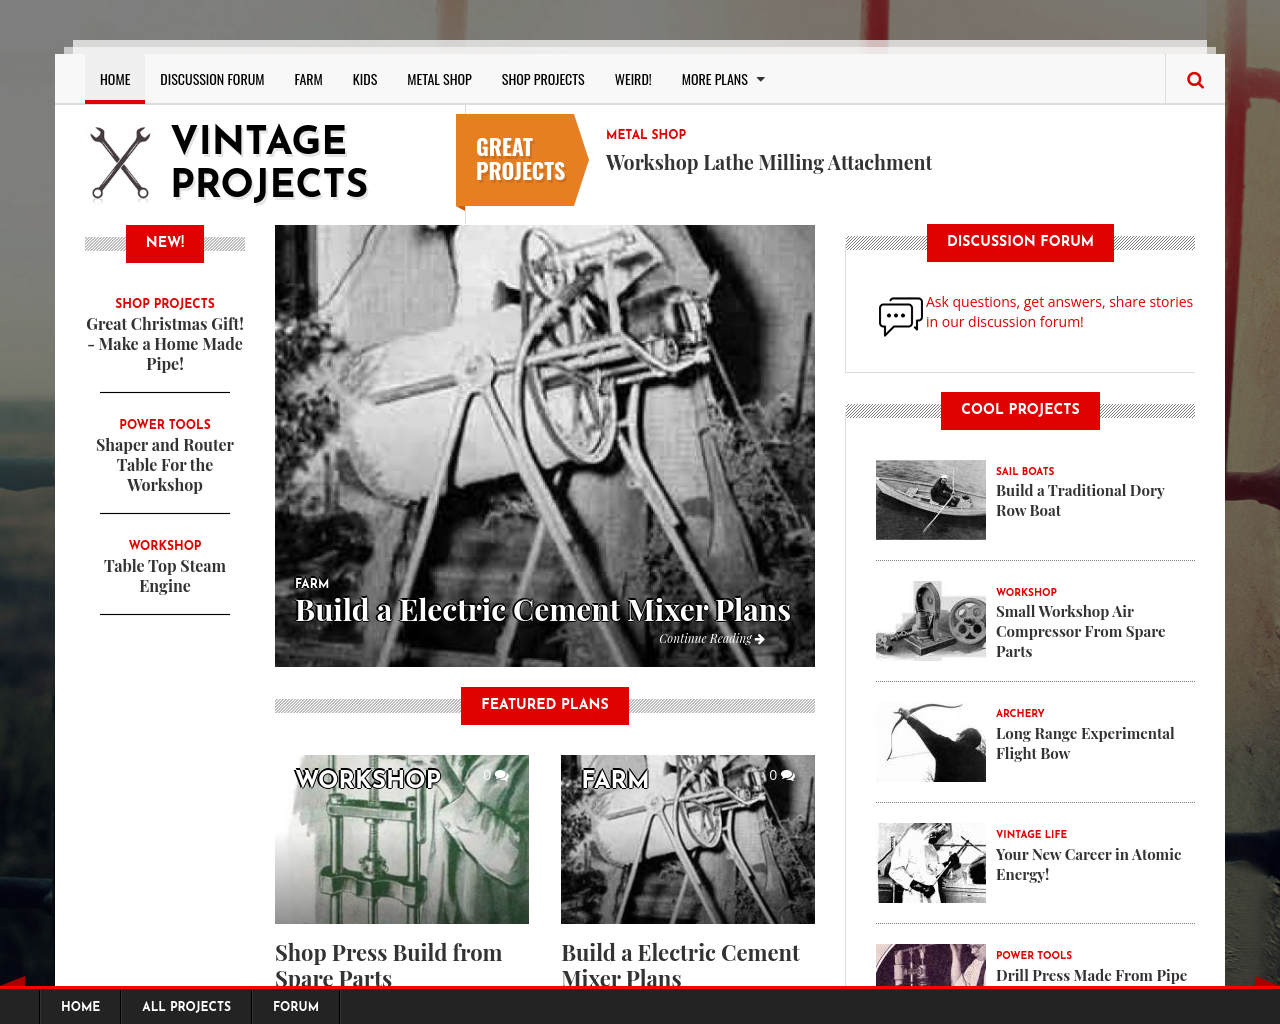 vintageprojects.com